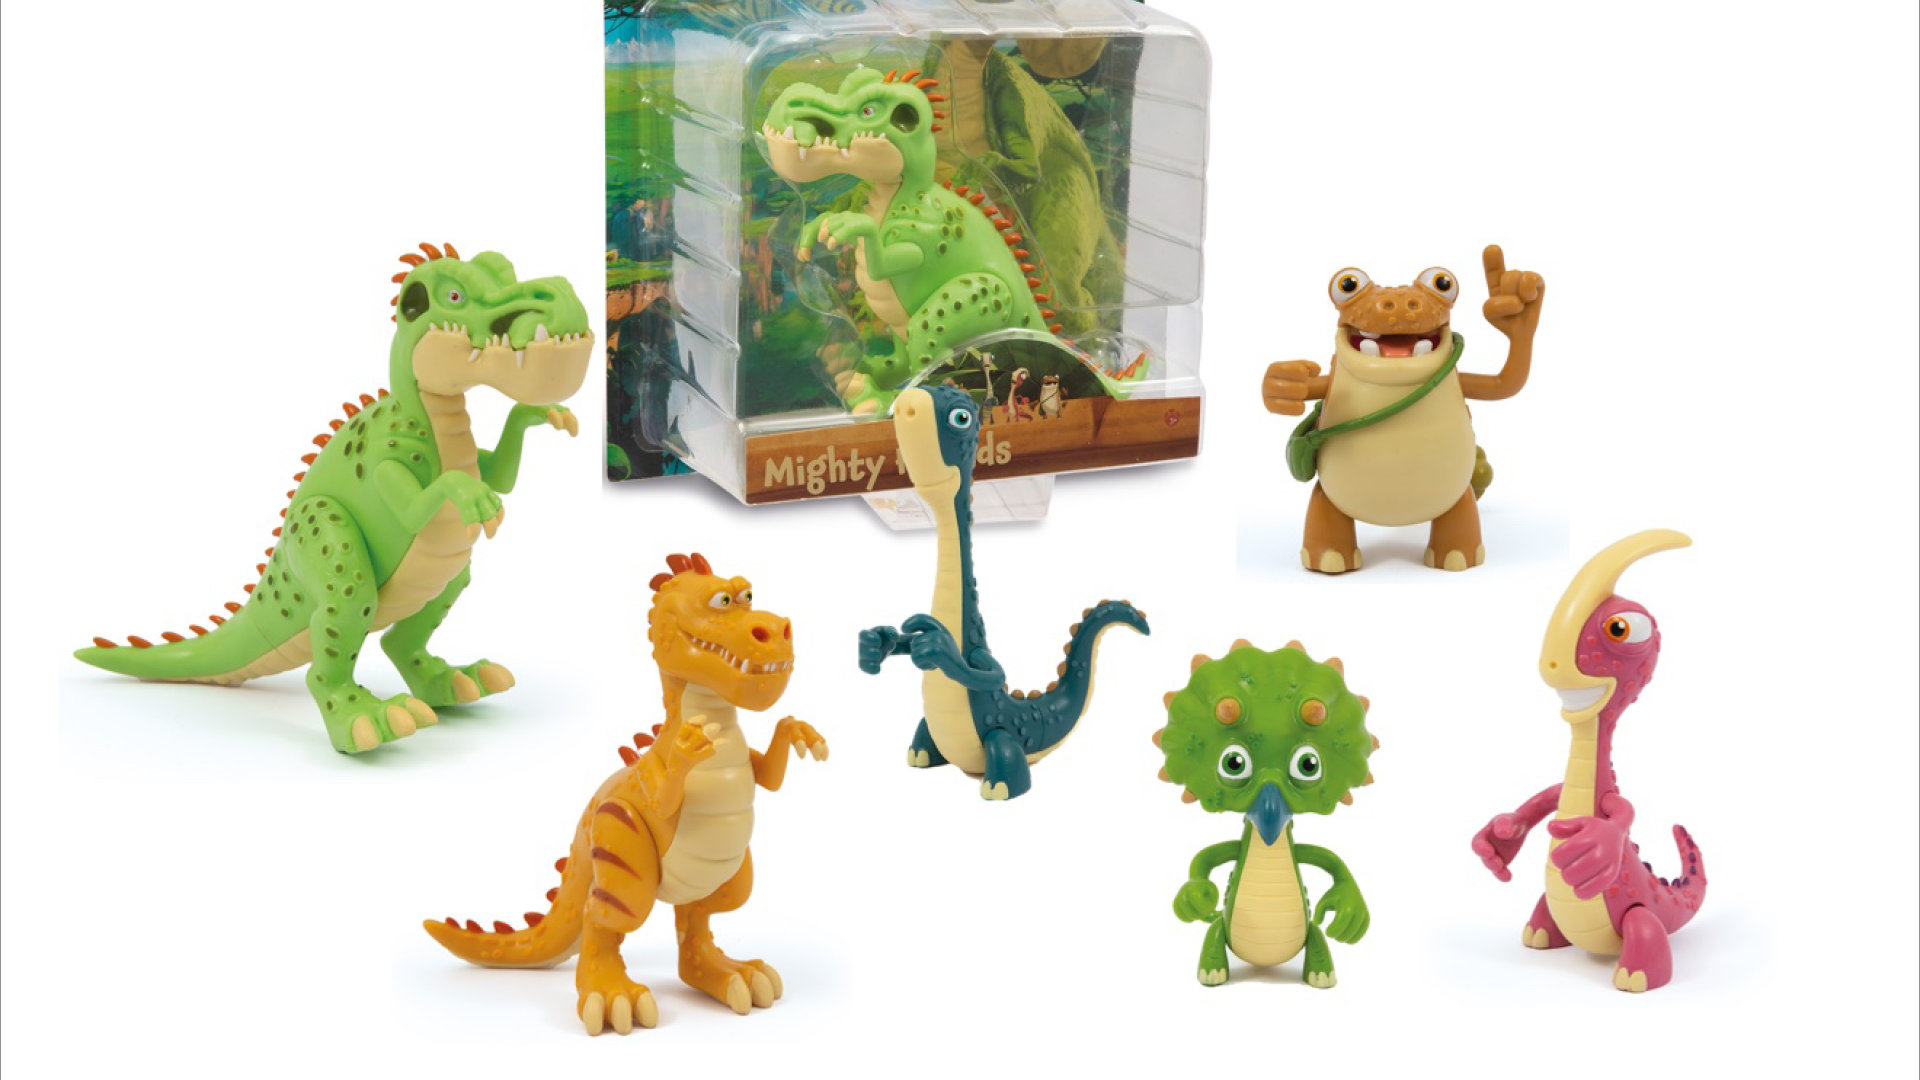 Gigantosaurus' Toy Line Launches in Italy